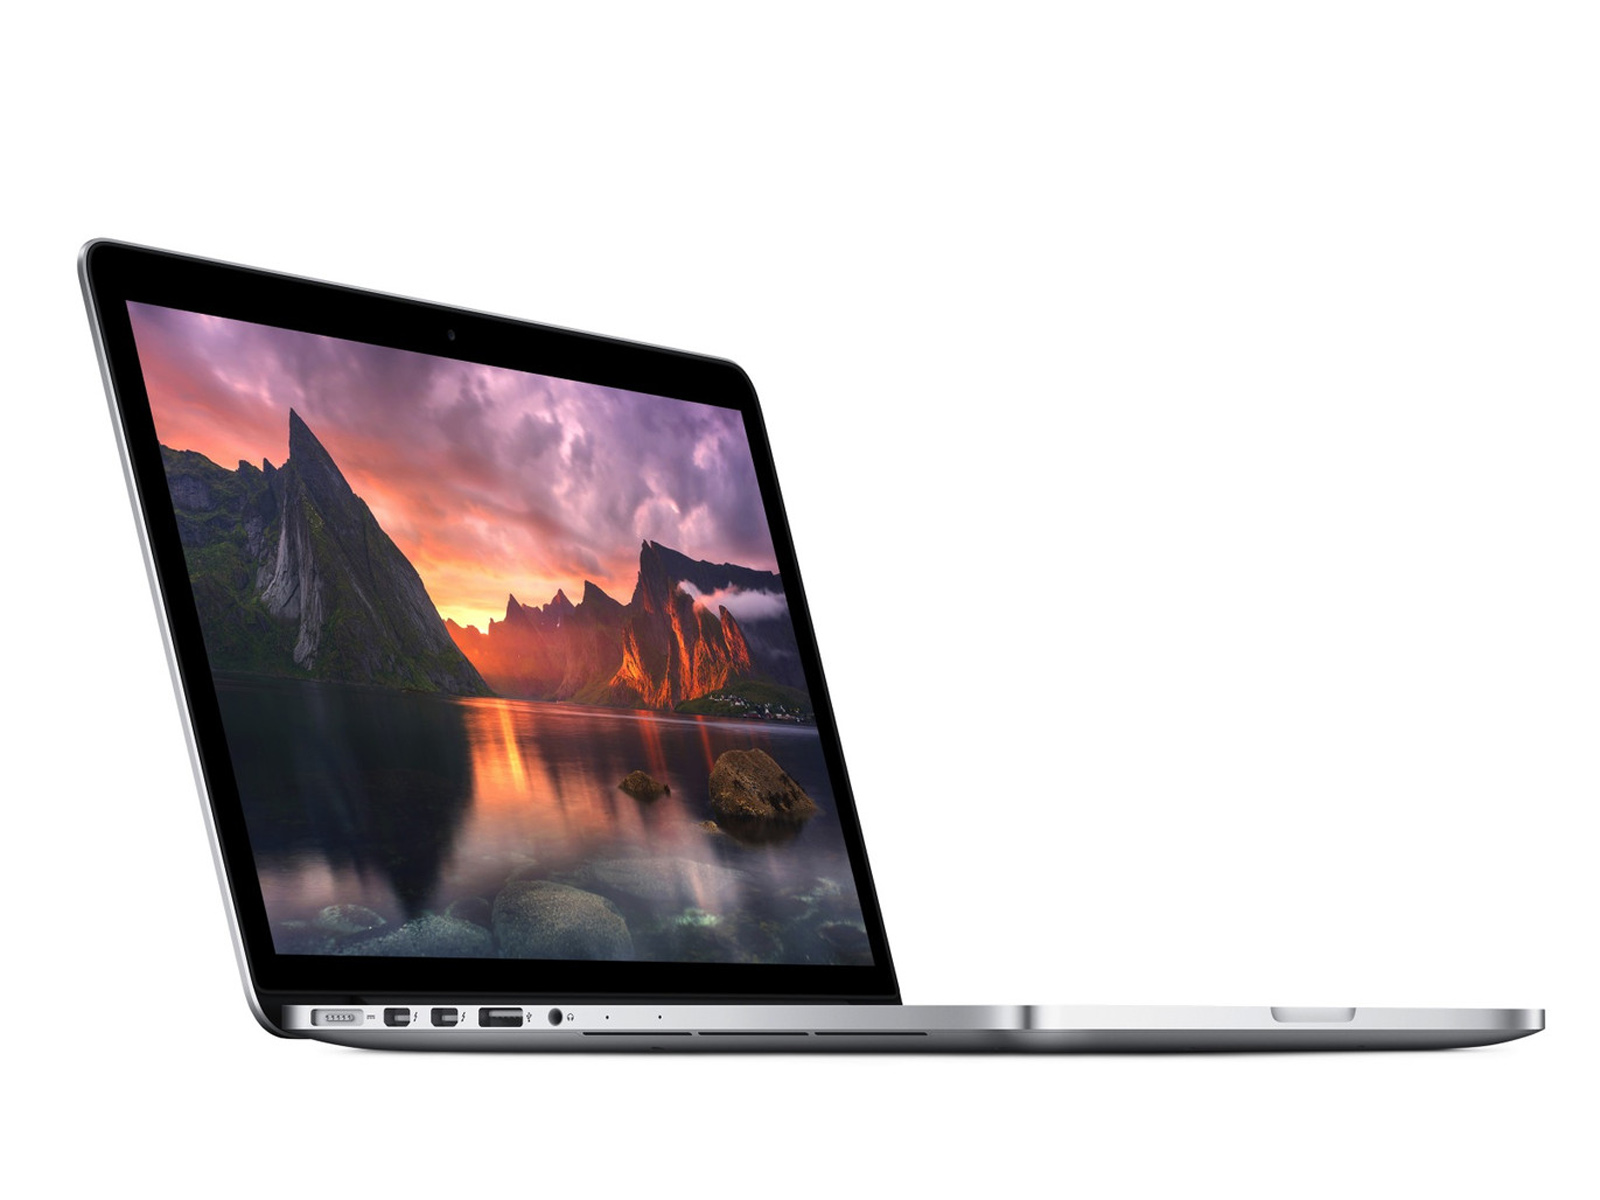 13 inch macbook pro with retina di play review 2016